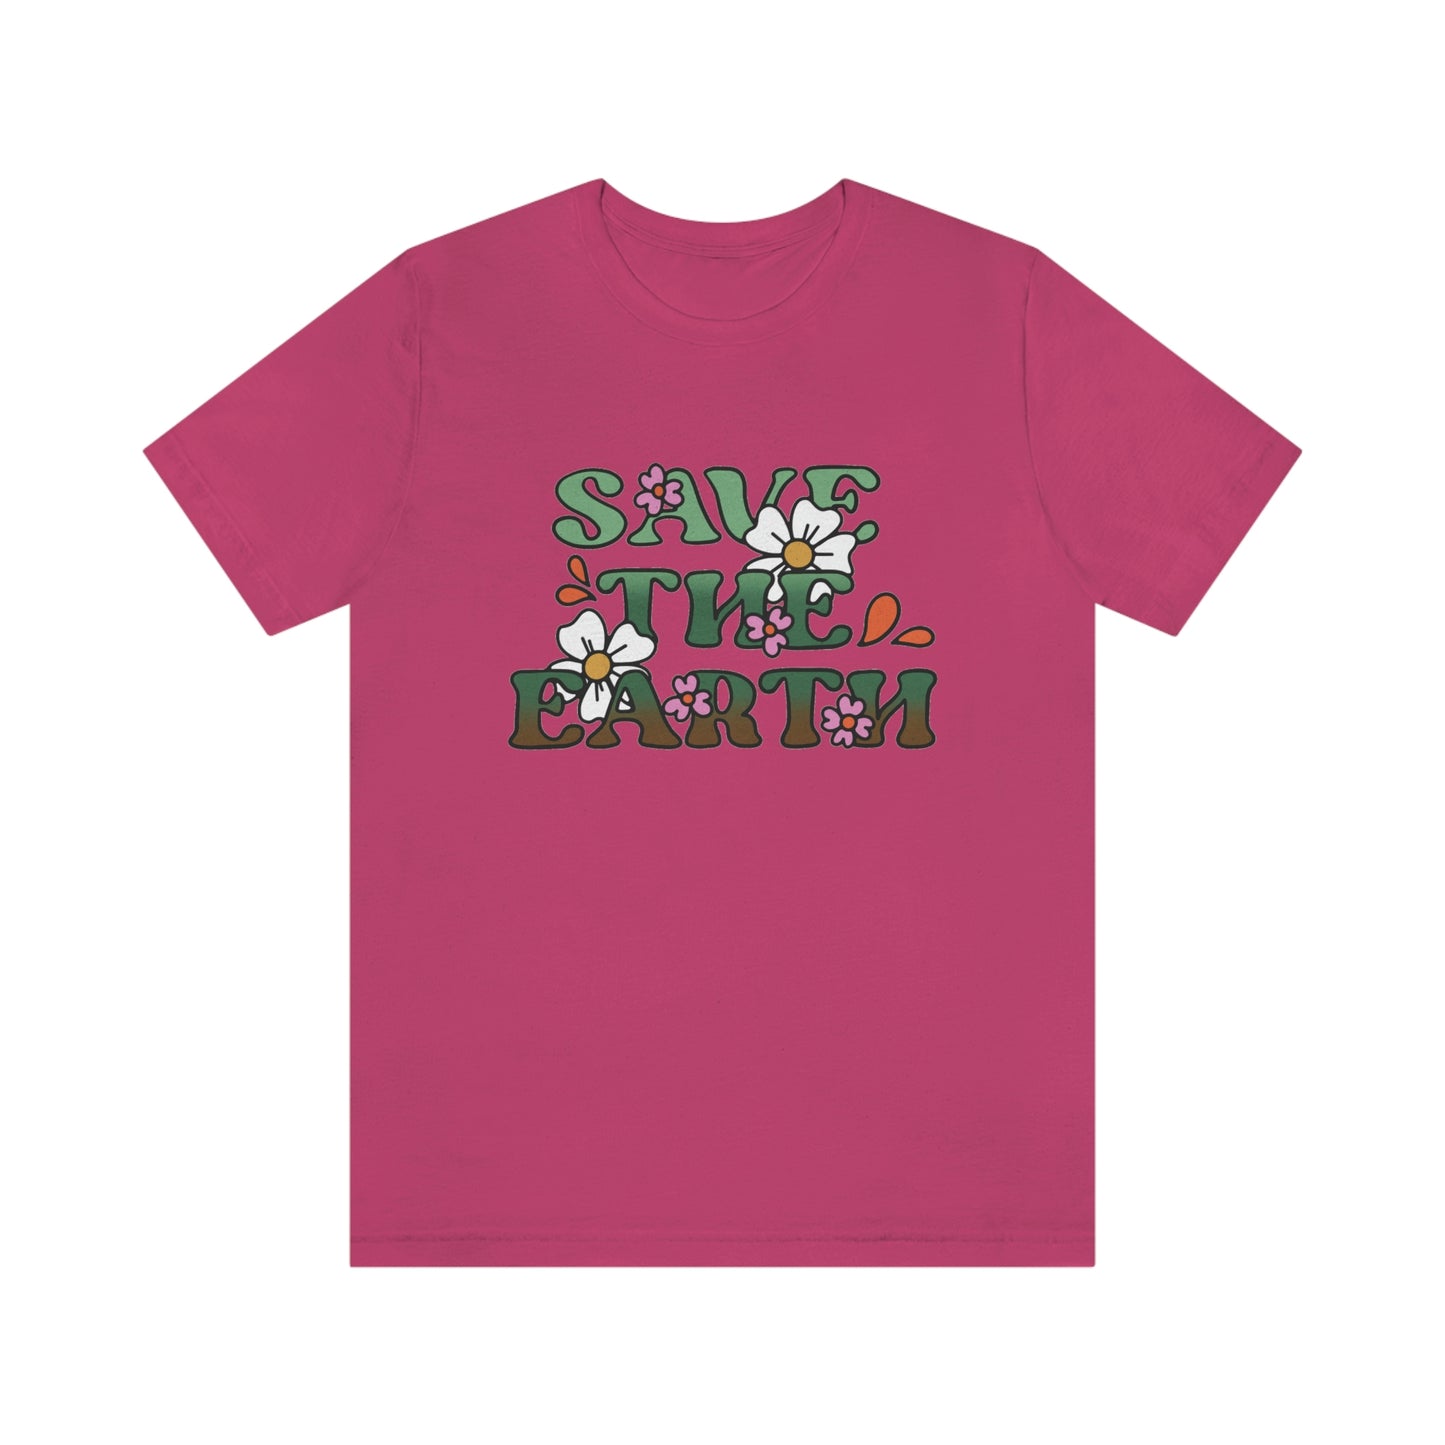 Save the Earth Unisex Jersey Short Sleeve Tee